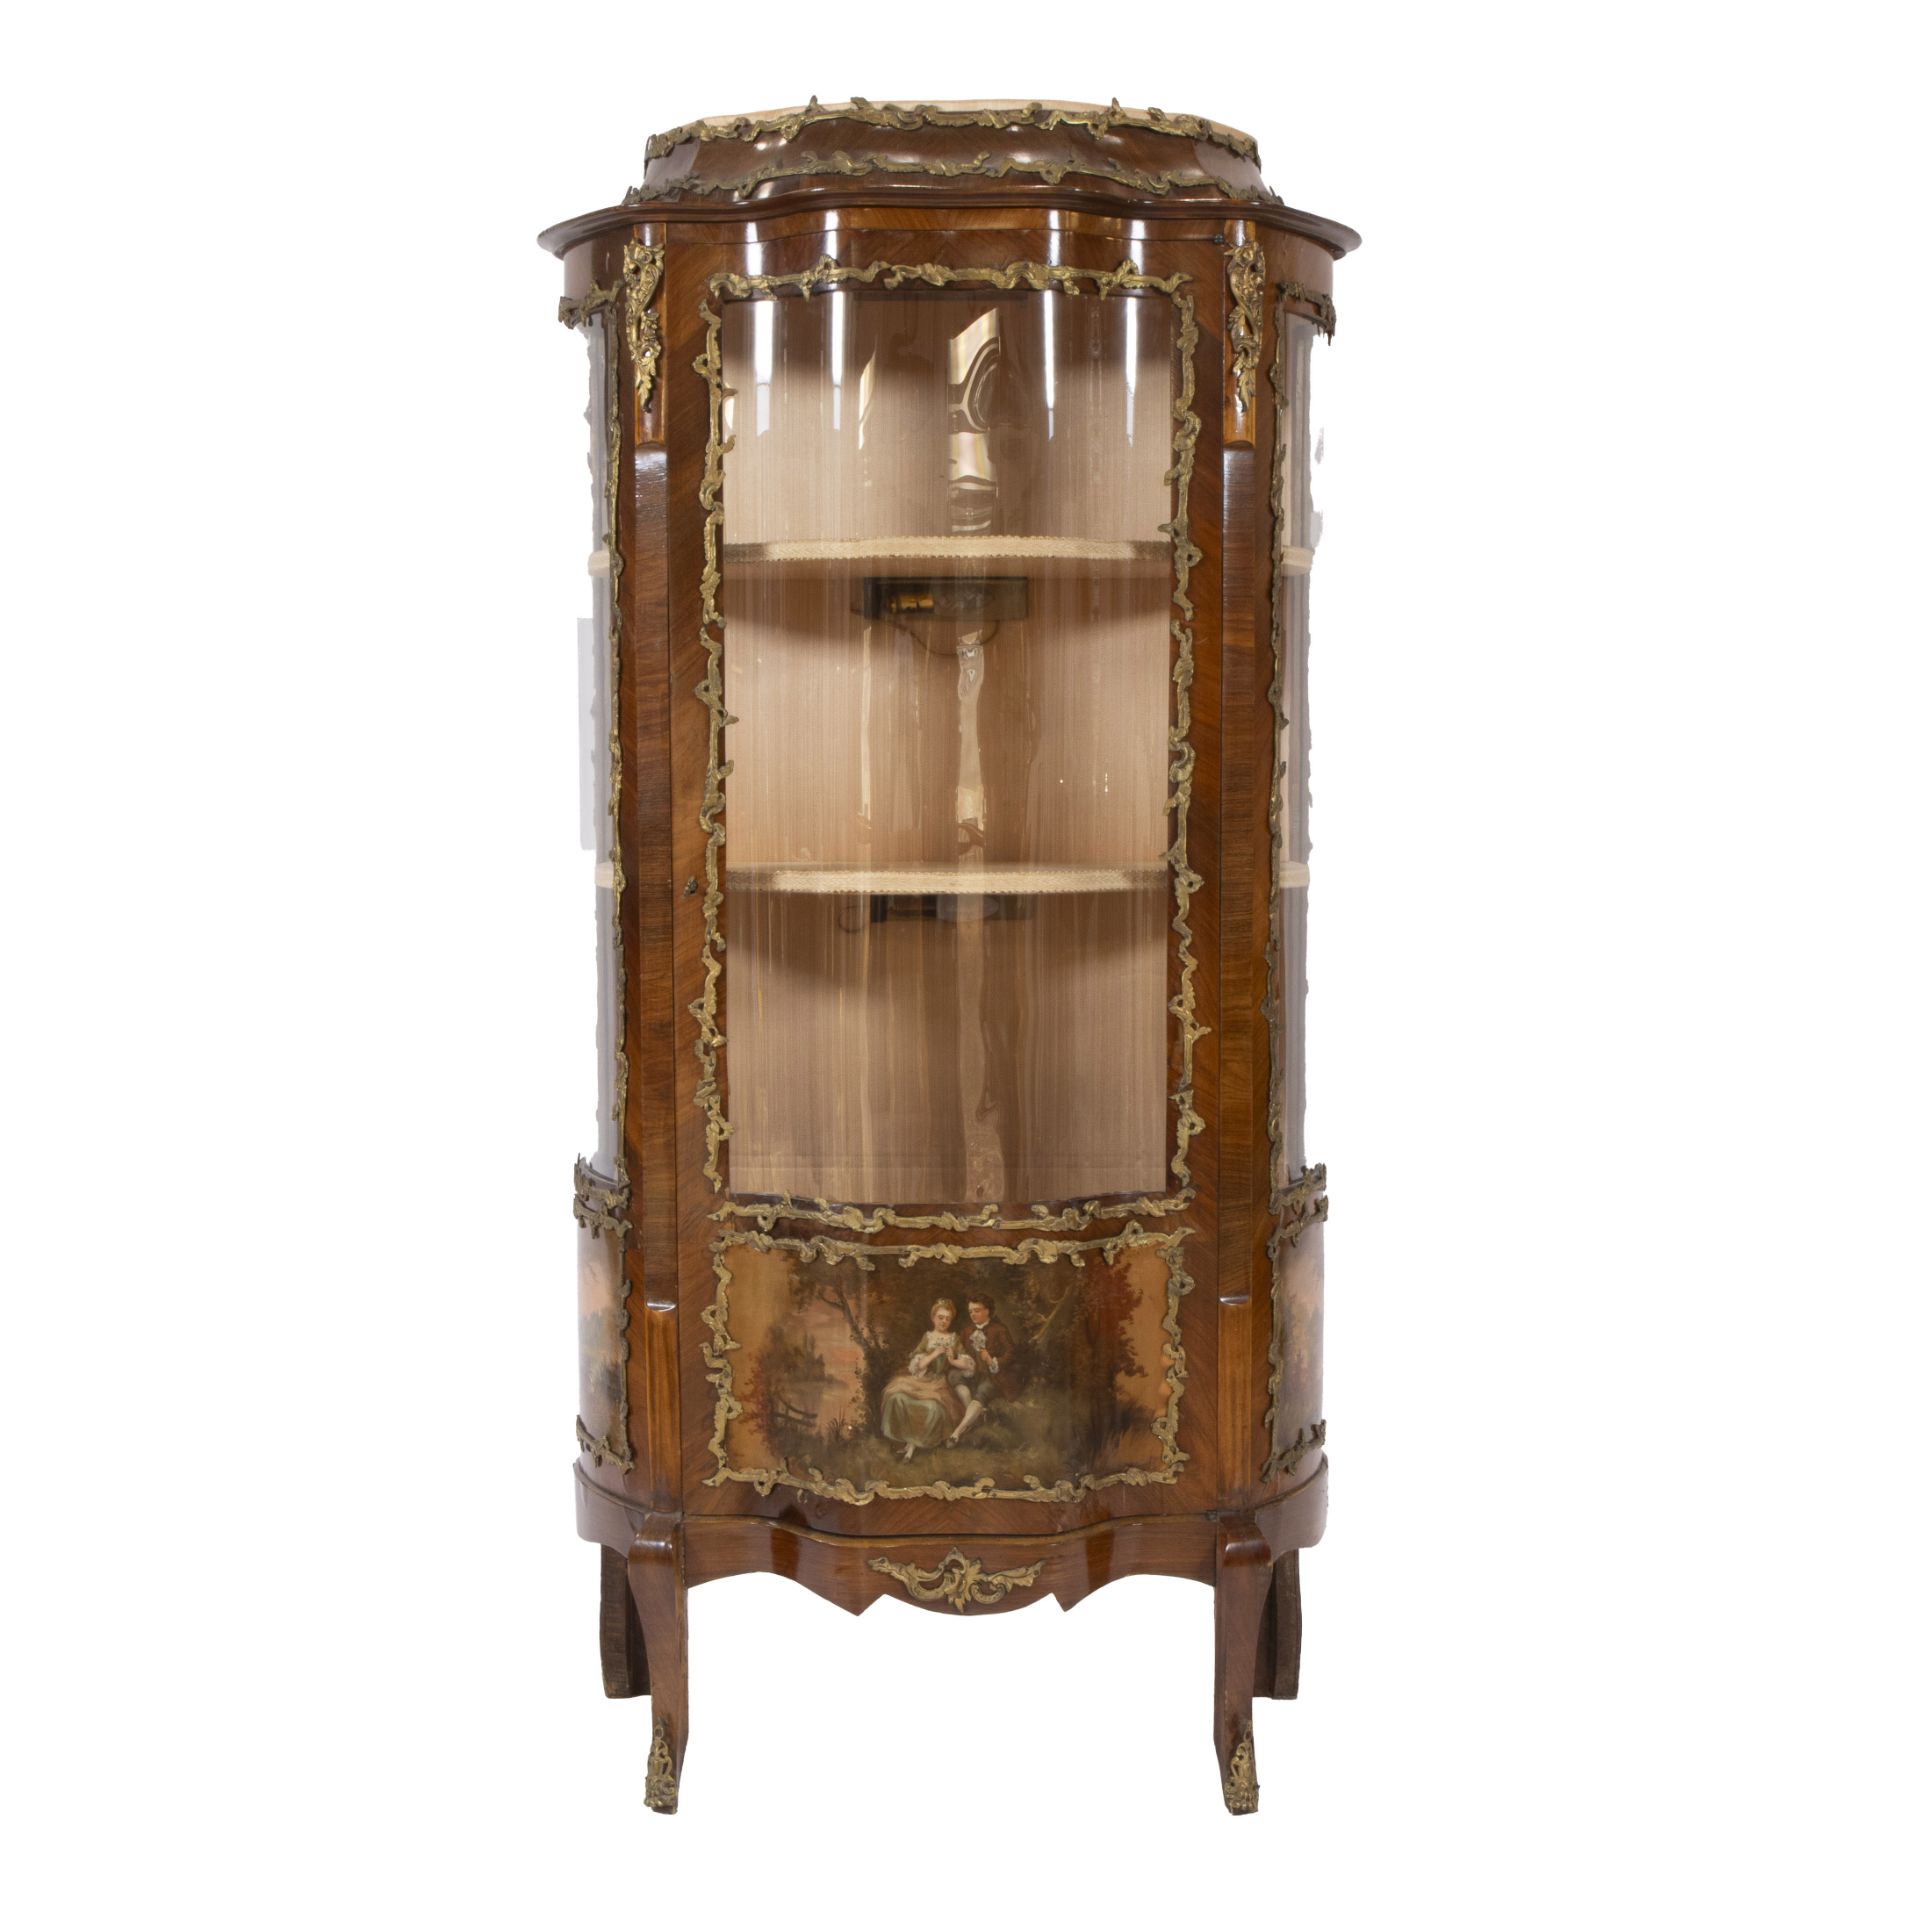 Louis XV style display case with curved glass and bronze mounts, decorated with a romantic decor